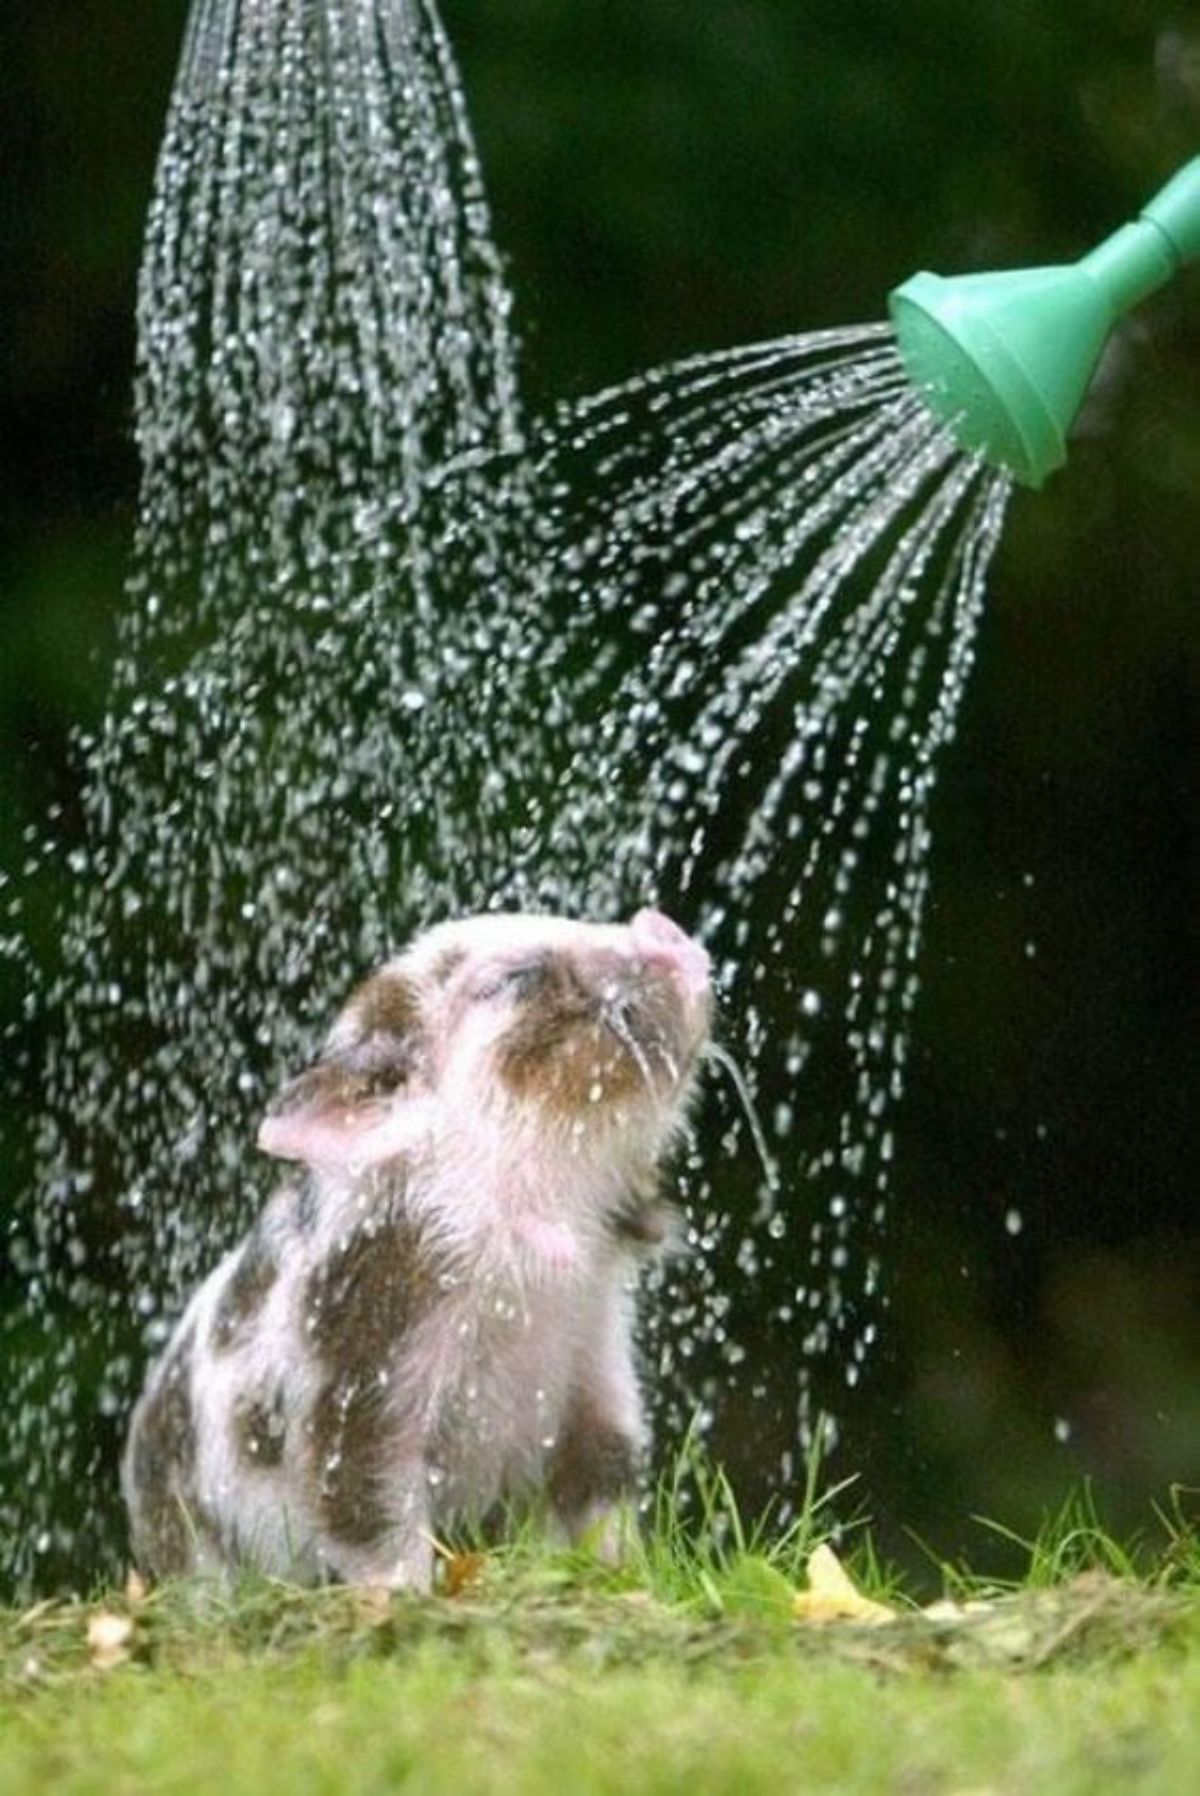 white and brown piglet getting a shower from a shower head